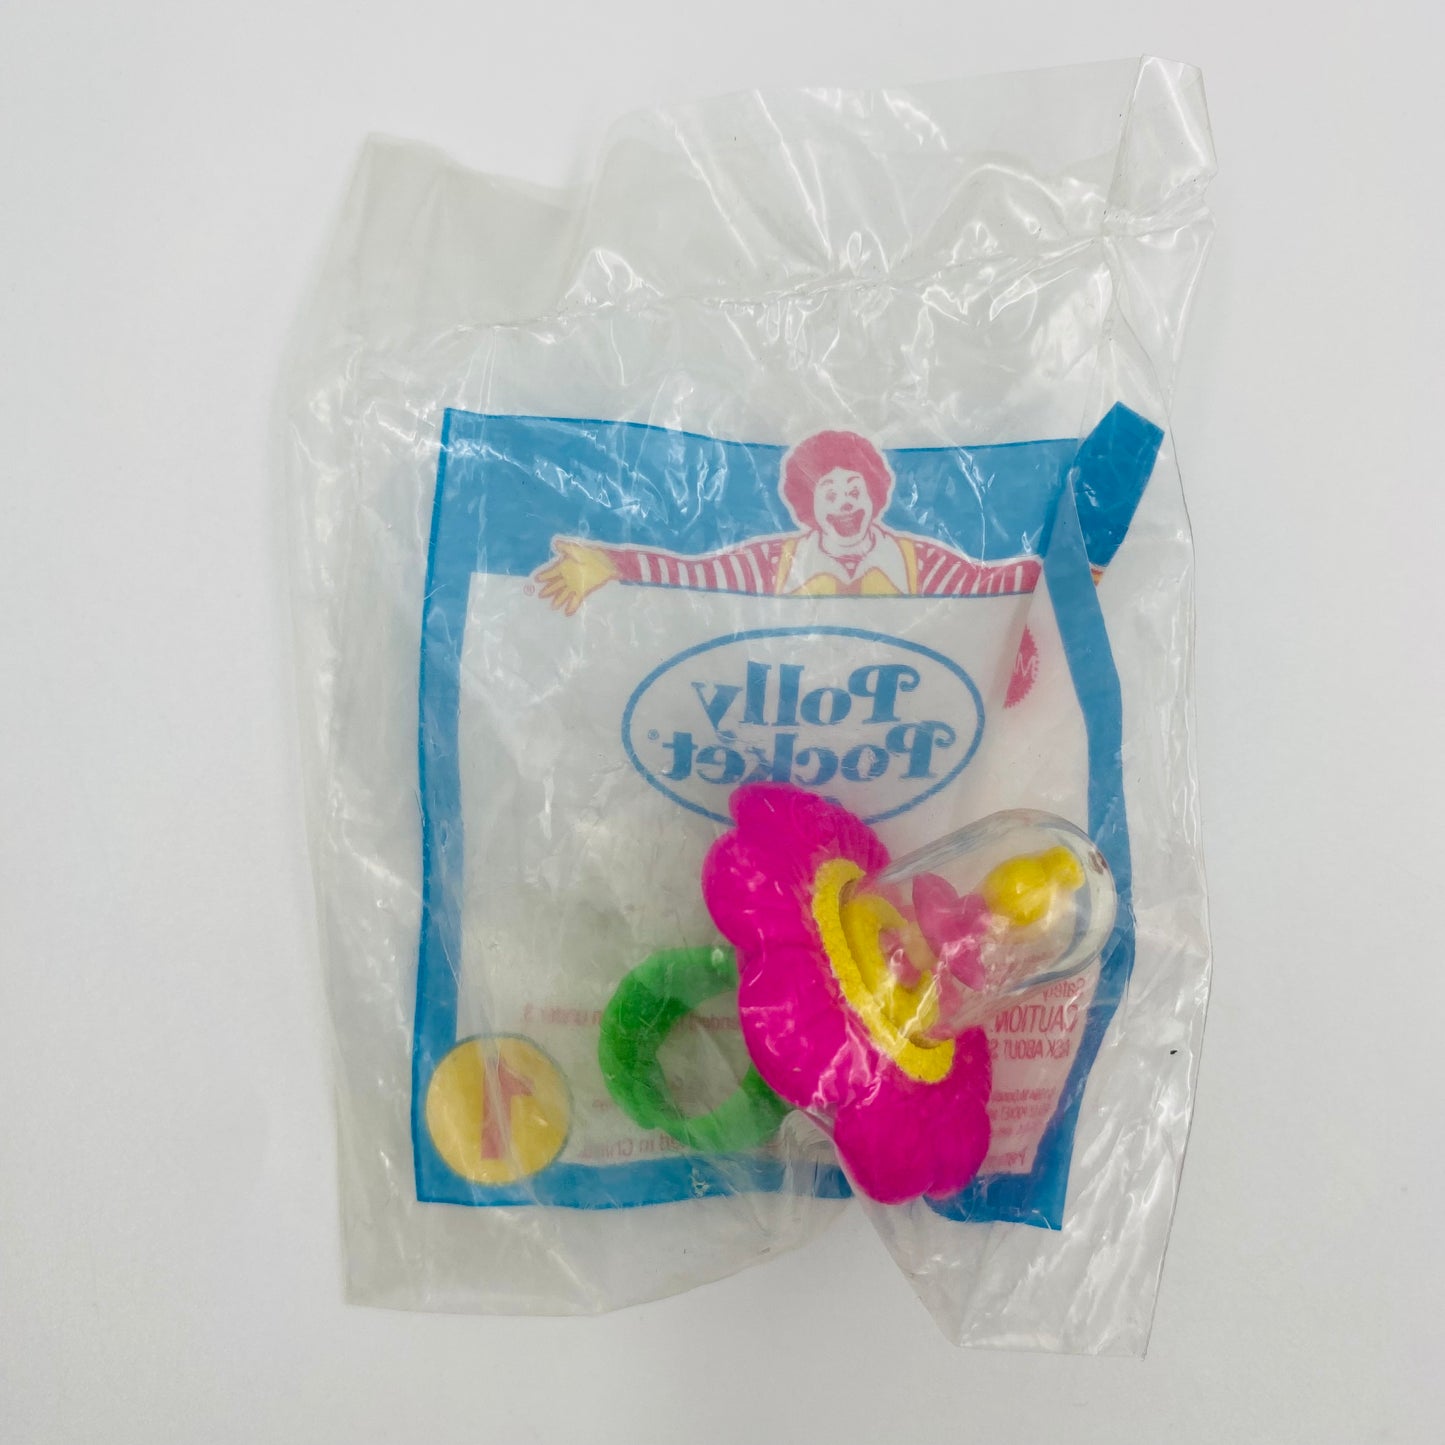 Polly Pocket Ring McDonald's Happy Meal toy (1994) bagged